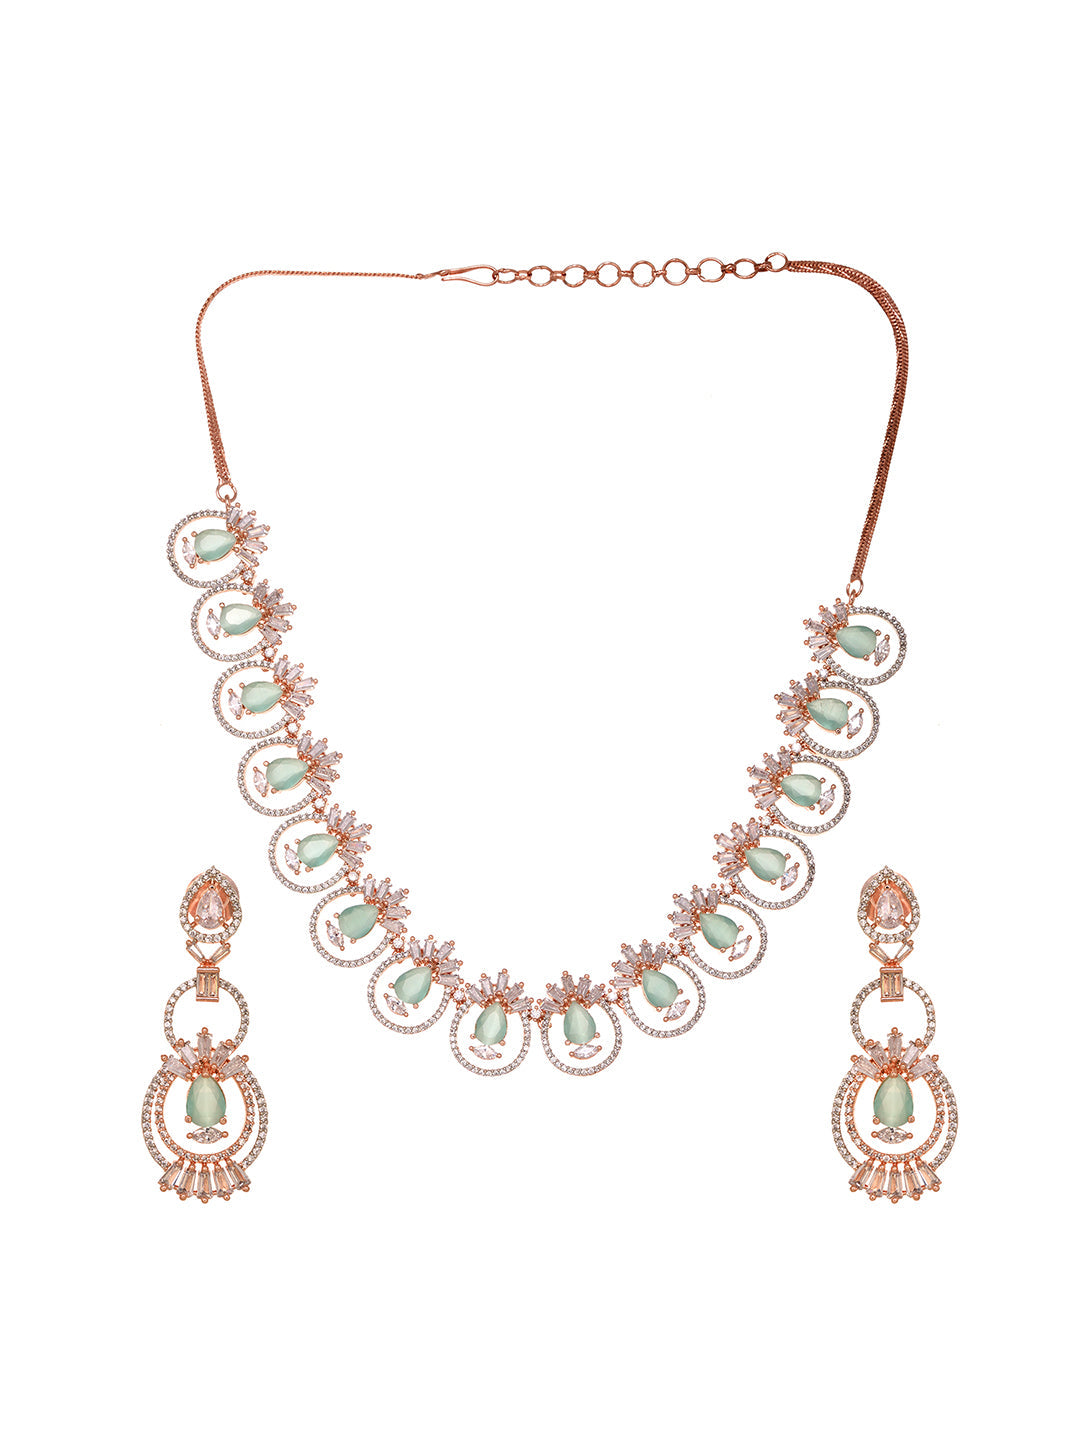 Rosegold Plated Mint AD studded Necklace Earrings Jewellery Set, zaveri pearls, sale price rs, sale price, sale gold plated, sale gold, sale, rubans, ring, regular price, priyassi jewellery, 